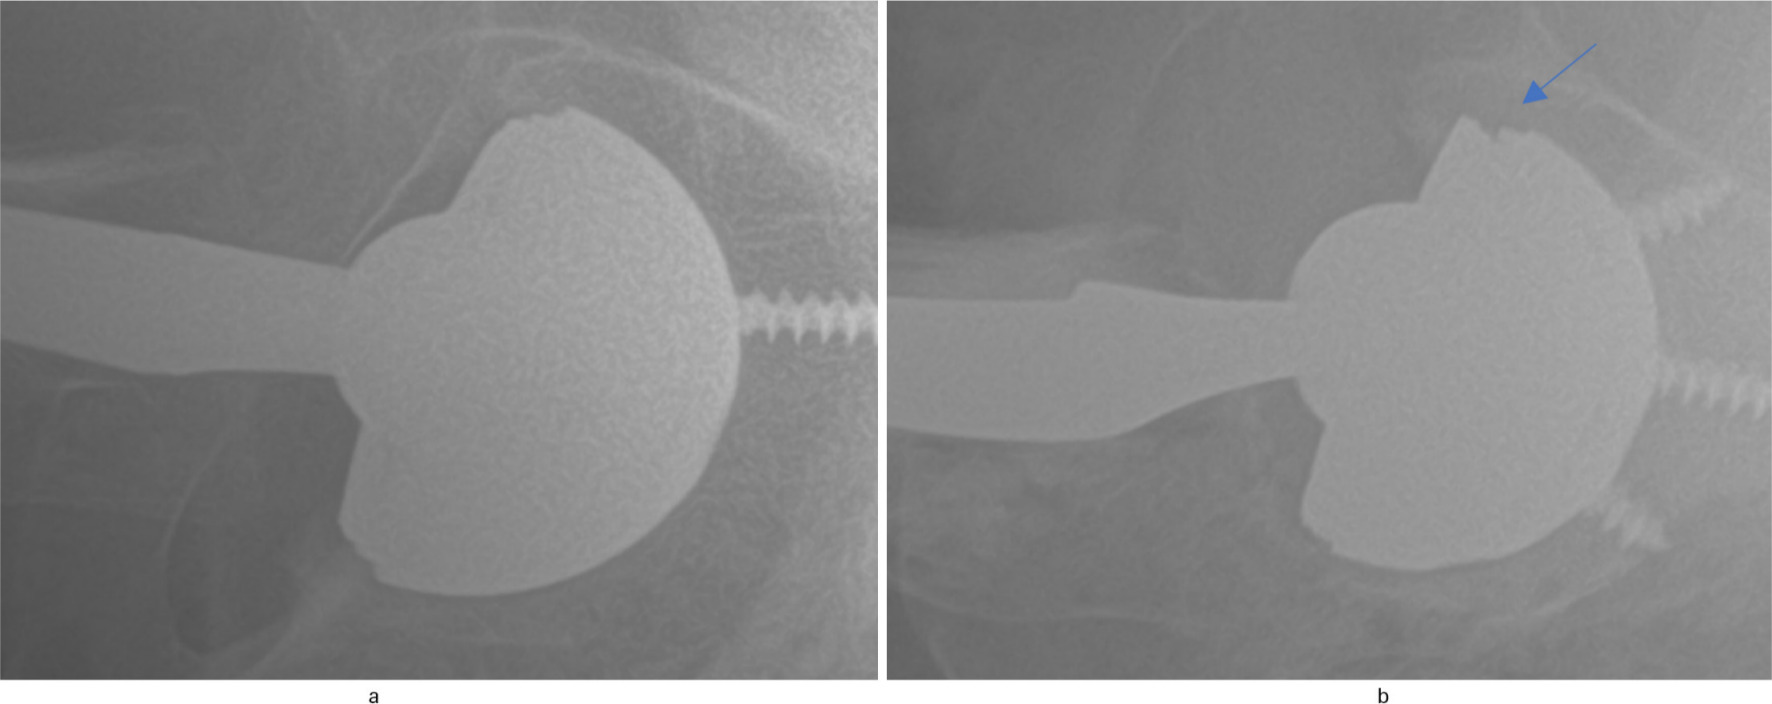 Fig. 1 
          A well-malseated versus a malseated Stryker Trident implant. a) A non-malseated Stryker Trident implant demonstrating no gaps between the liner and the rim of the acetabular shell. A well-malseated versus a malseated Stryker Trident implant. b) A malseated Stryker Trident implant with a clear gap between the metal back of the liner and the rim of the acetabular shell.
        